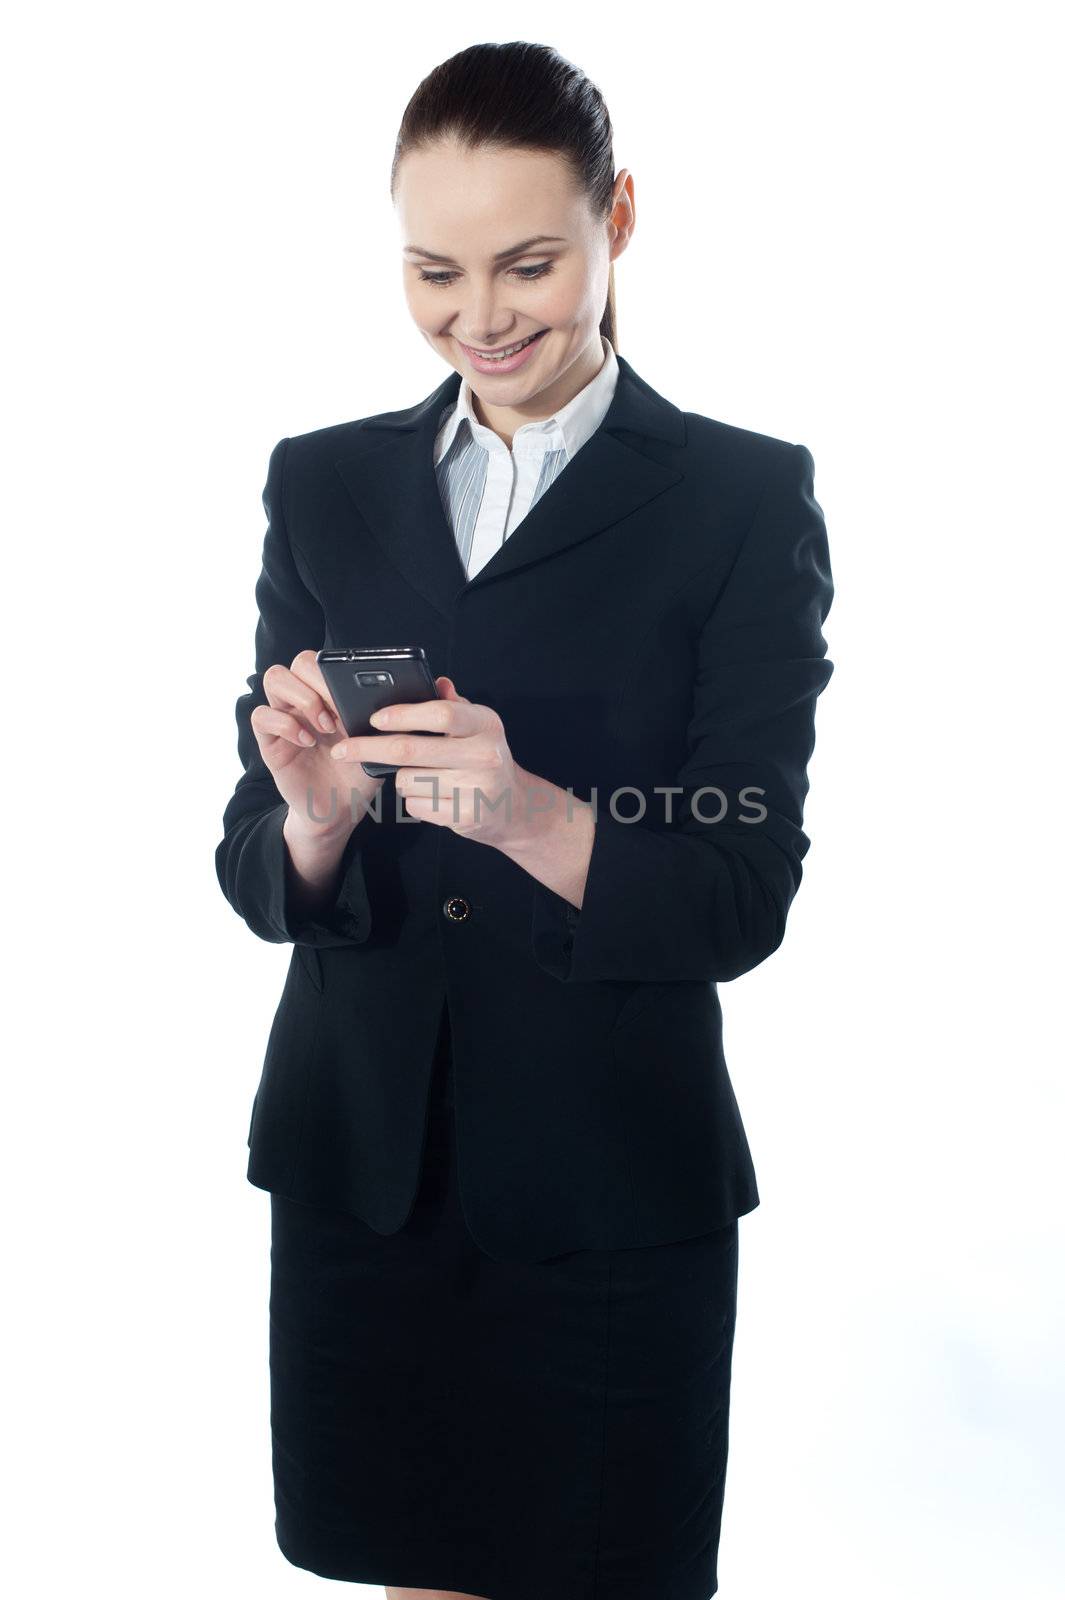 Confident businessperson messaging and smiling